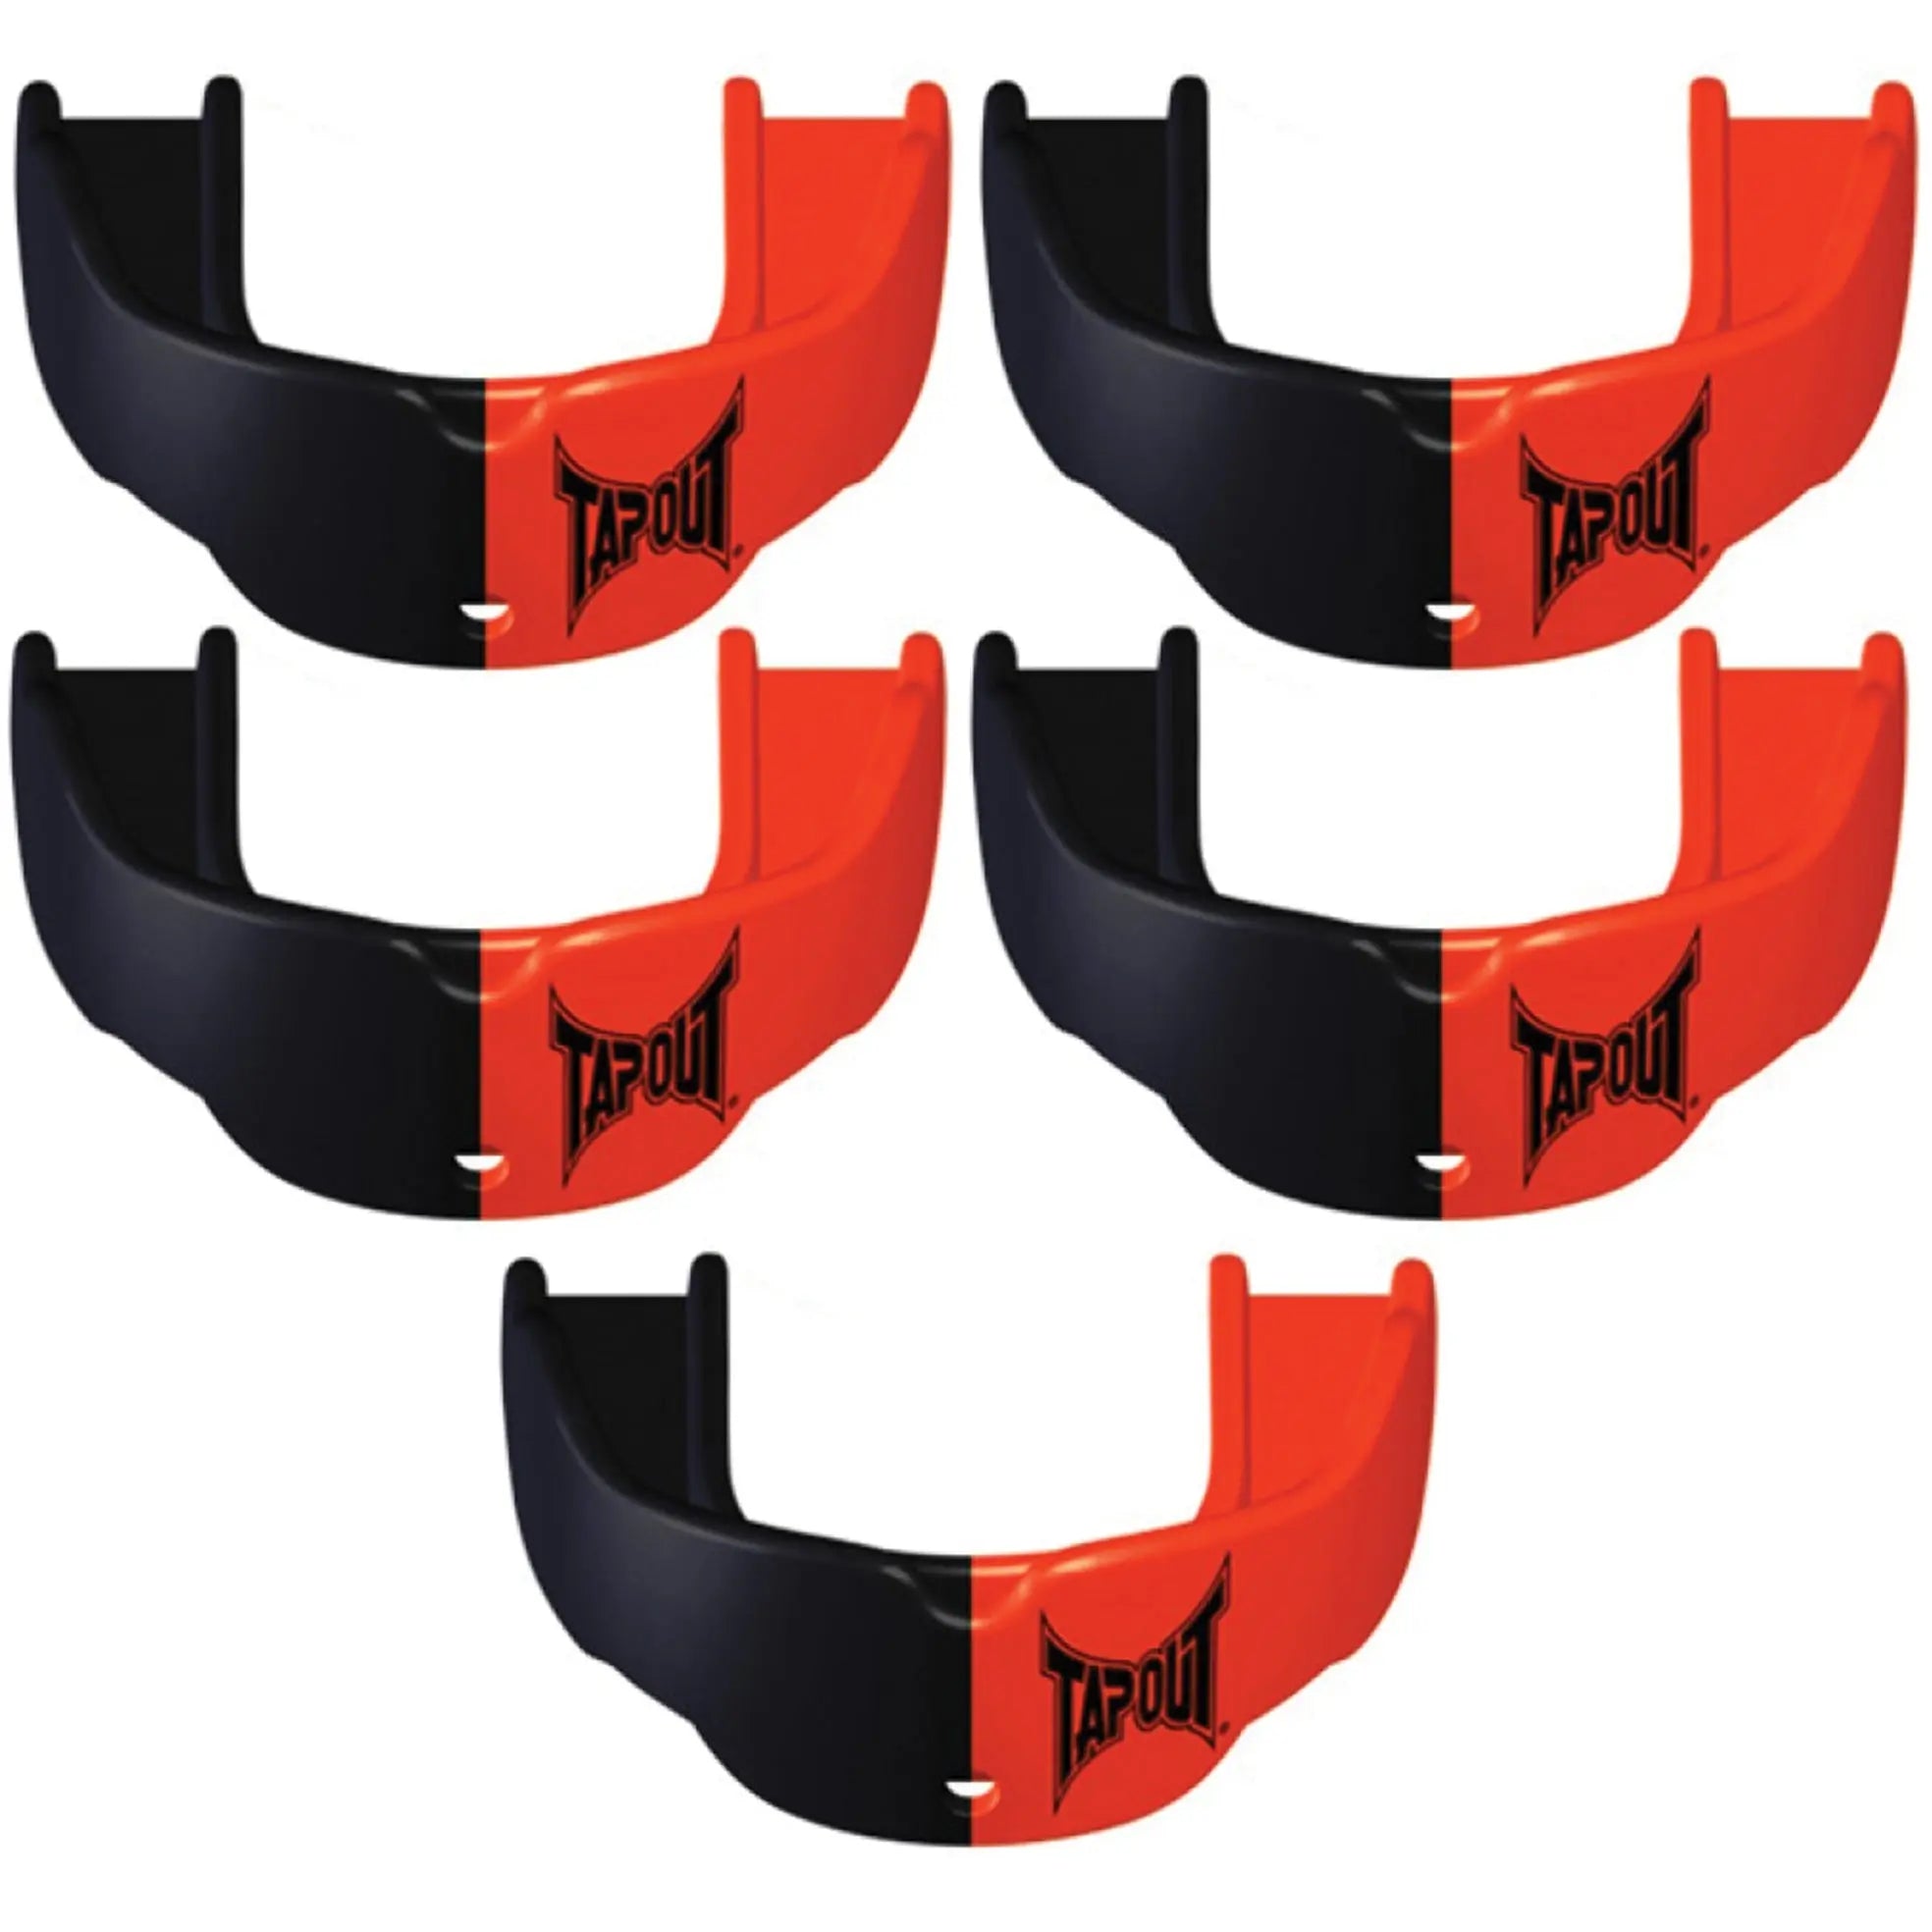 Tapout Youth Protective Sports Mouthguard with Strap 5-Pack - Orange/Black Tapout